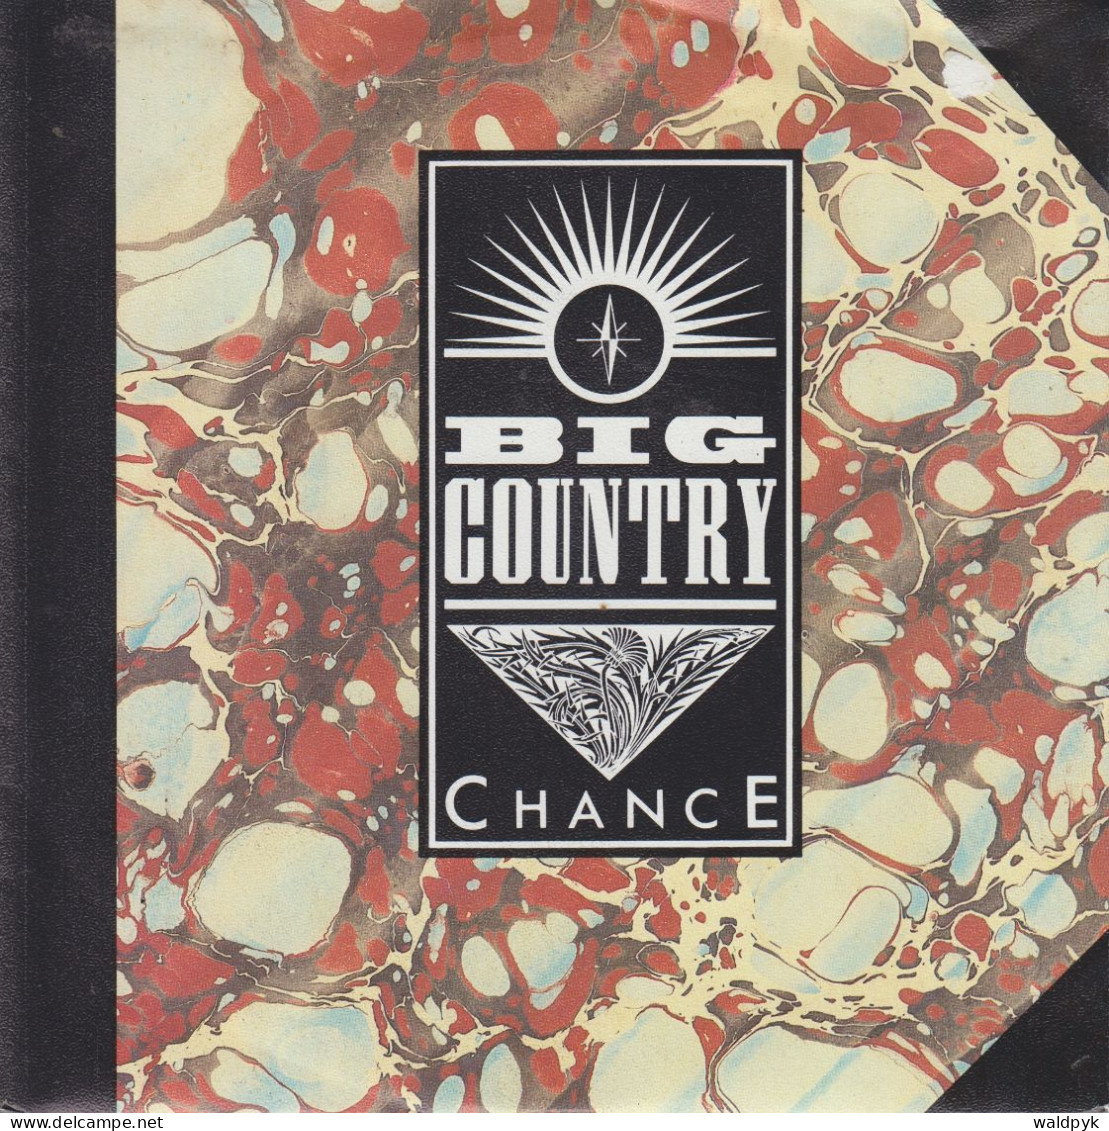 BIG COUNTRY - Chance - Other - English Music